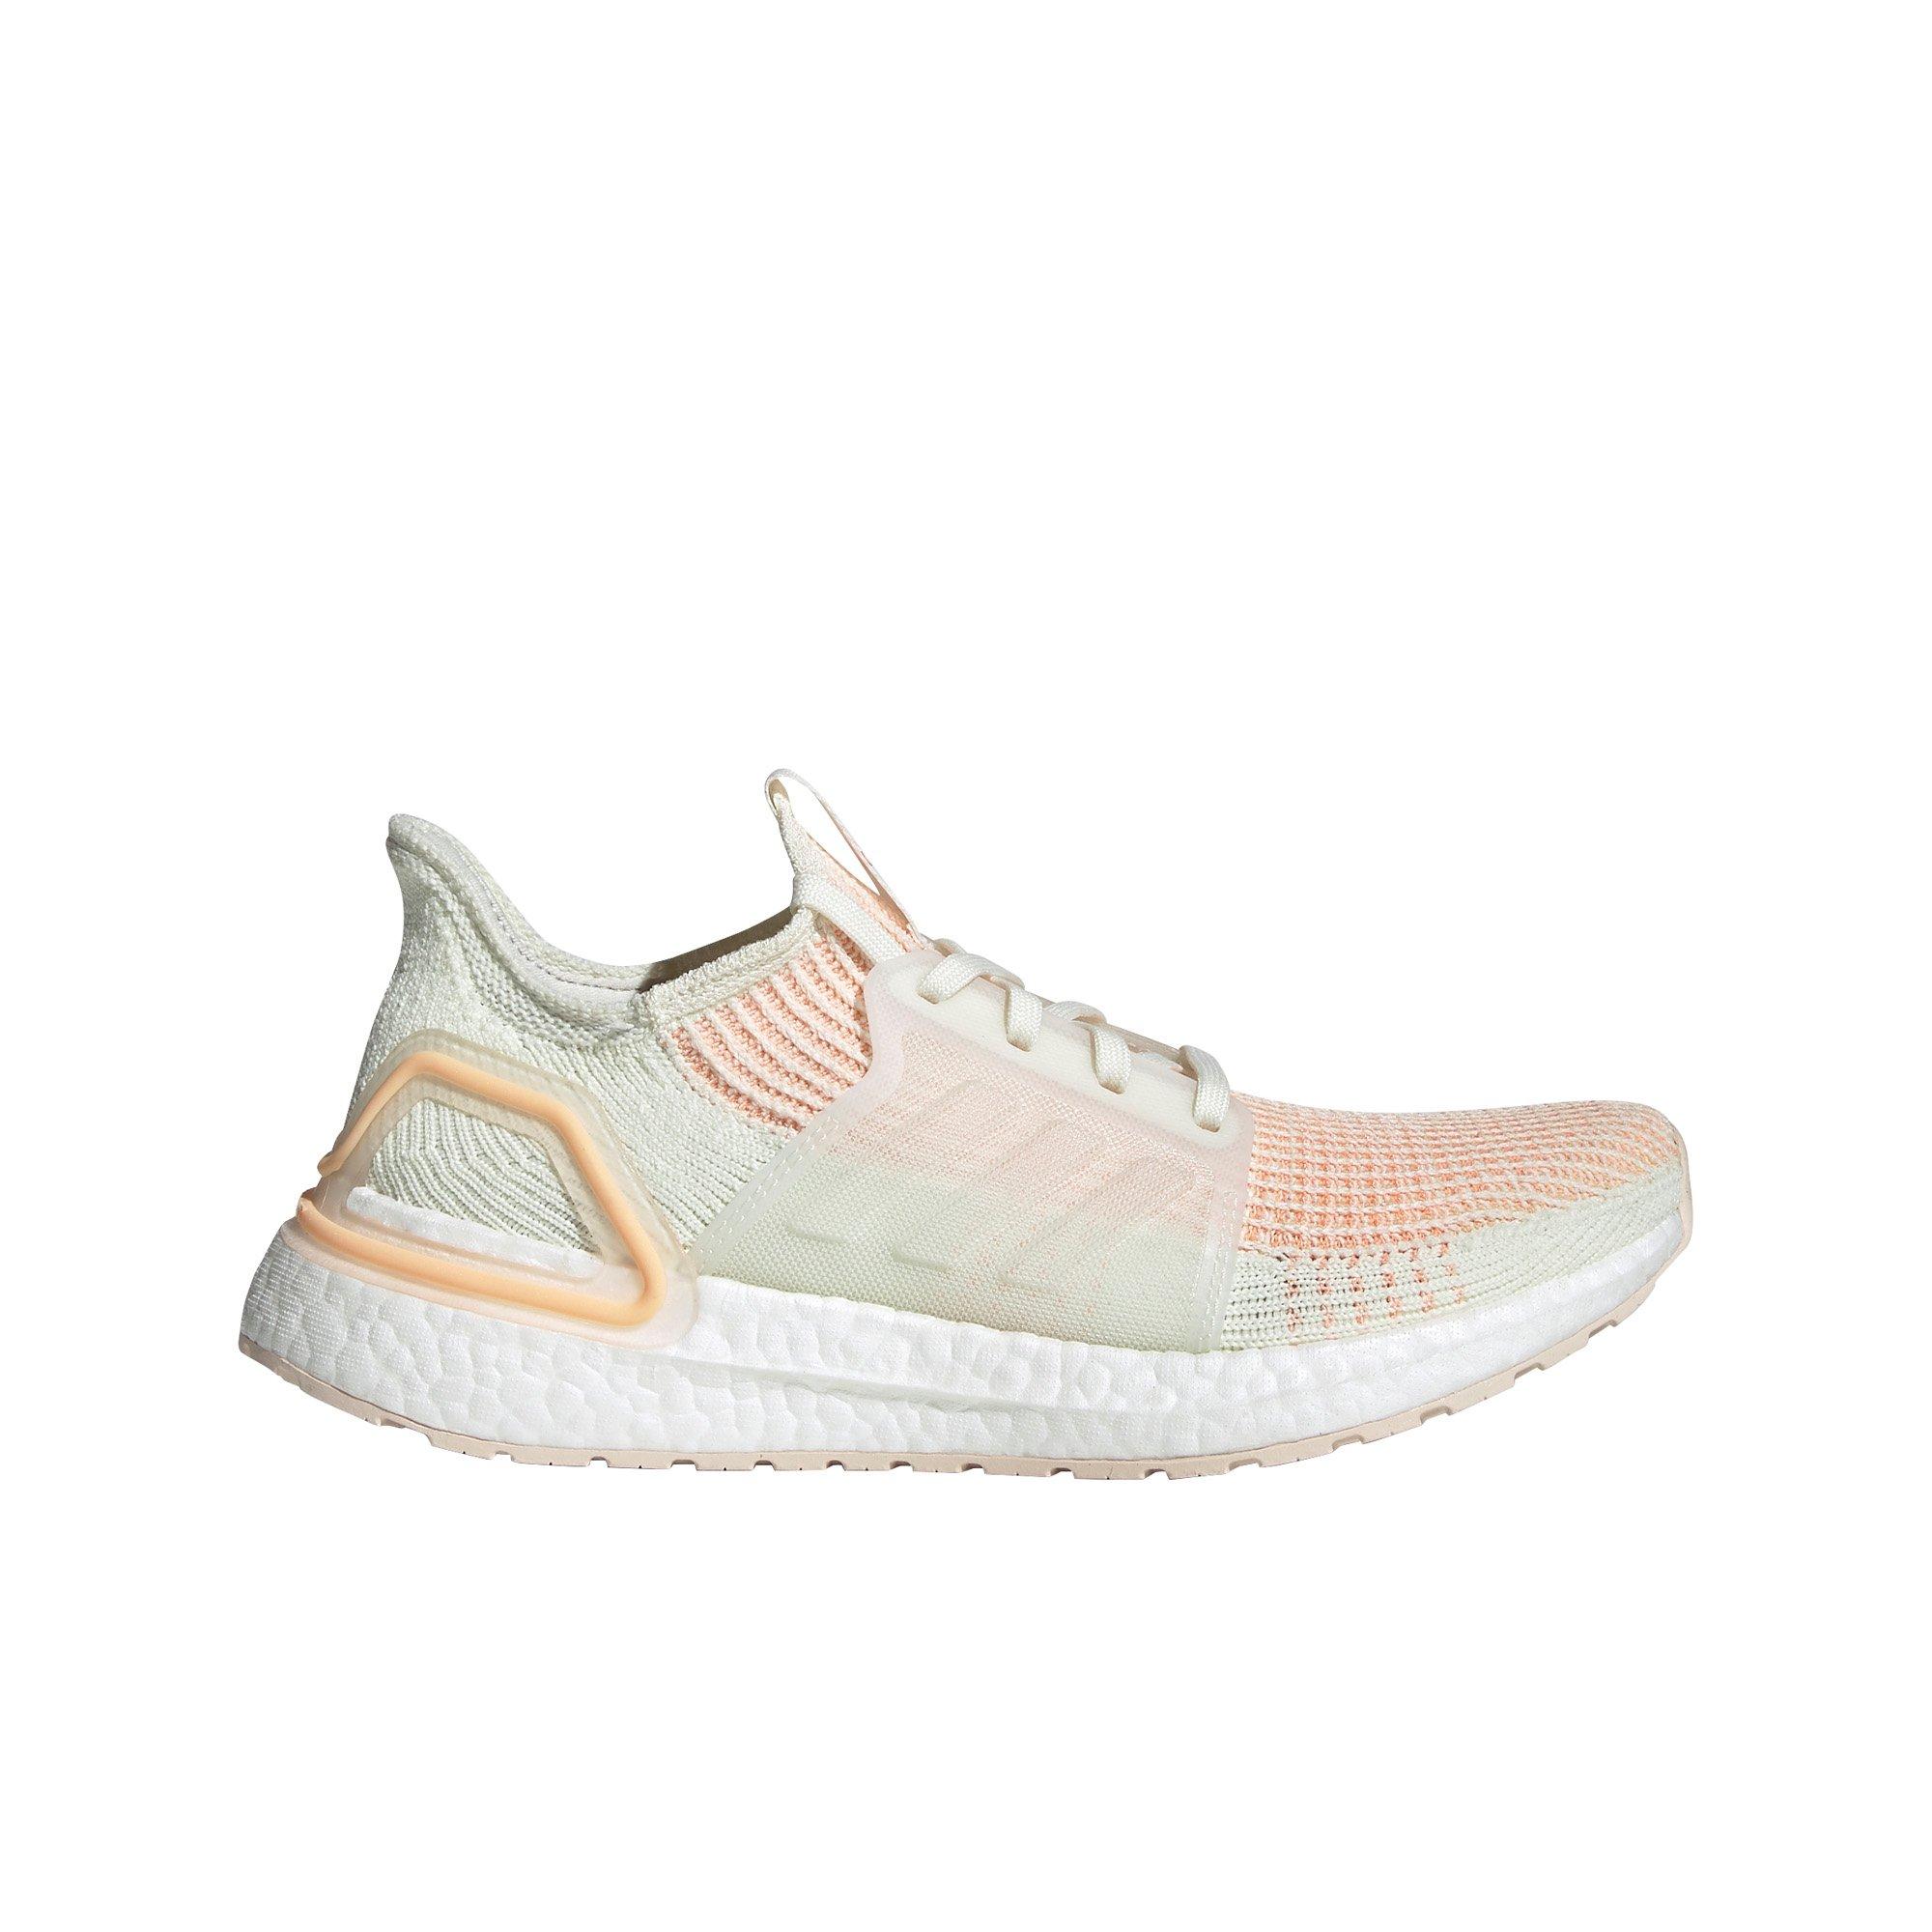 adidas ultra boost x off white